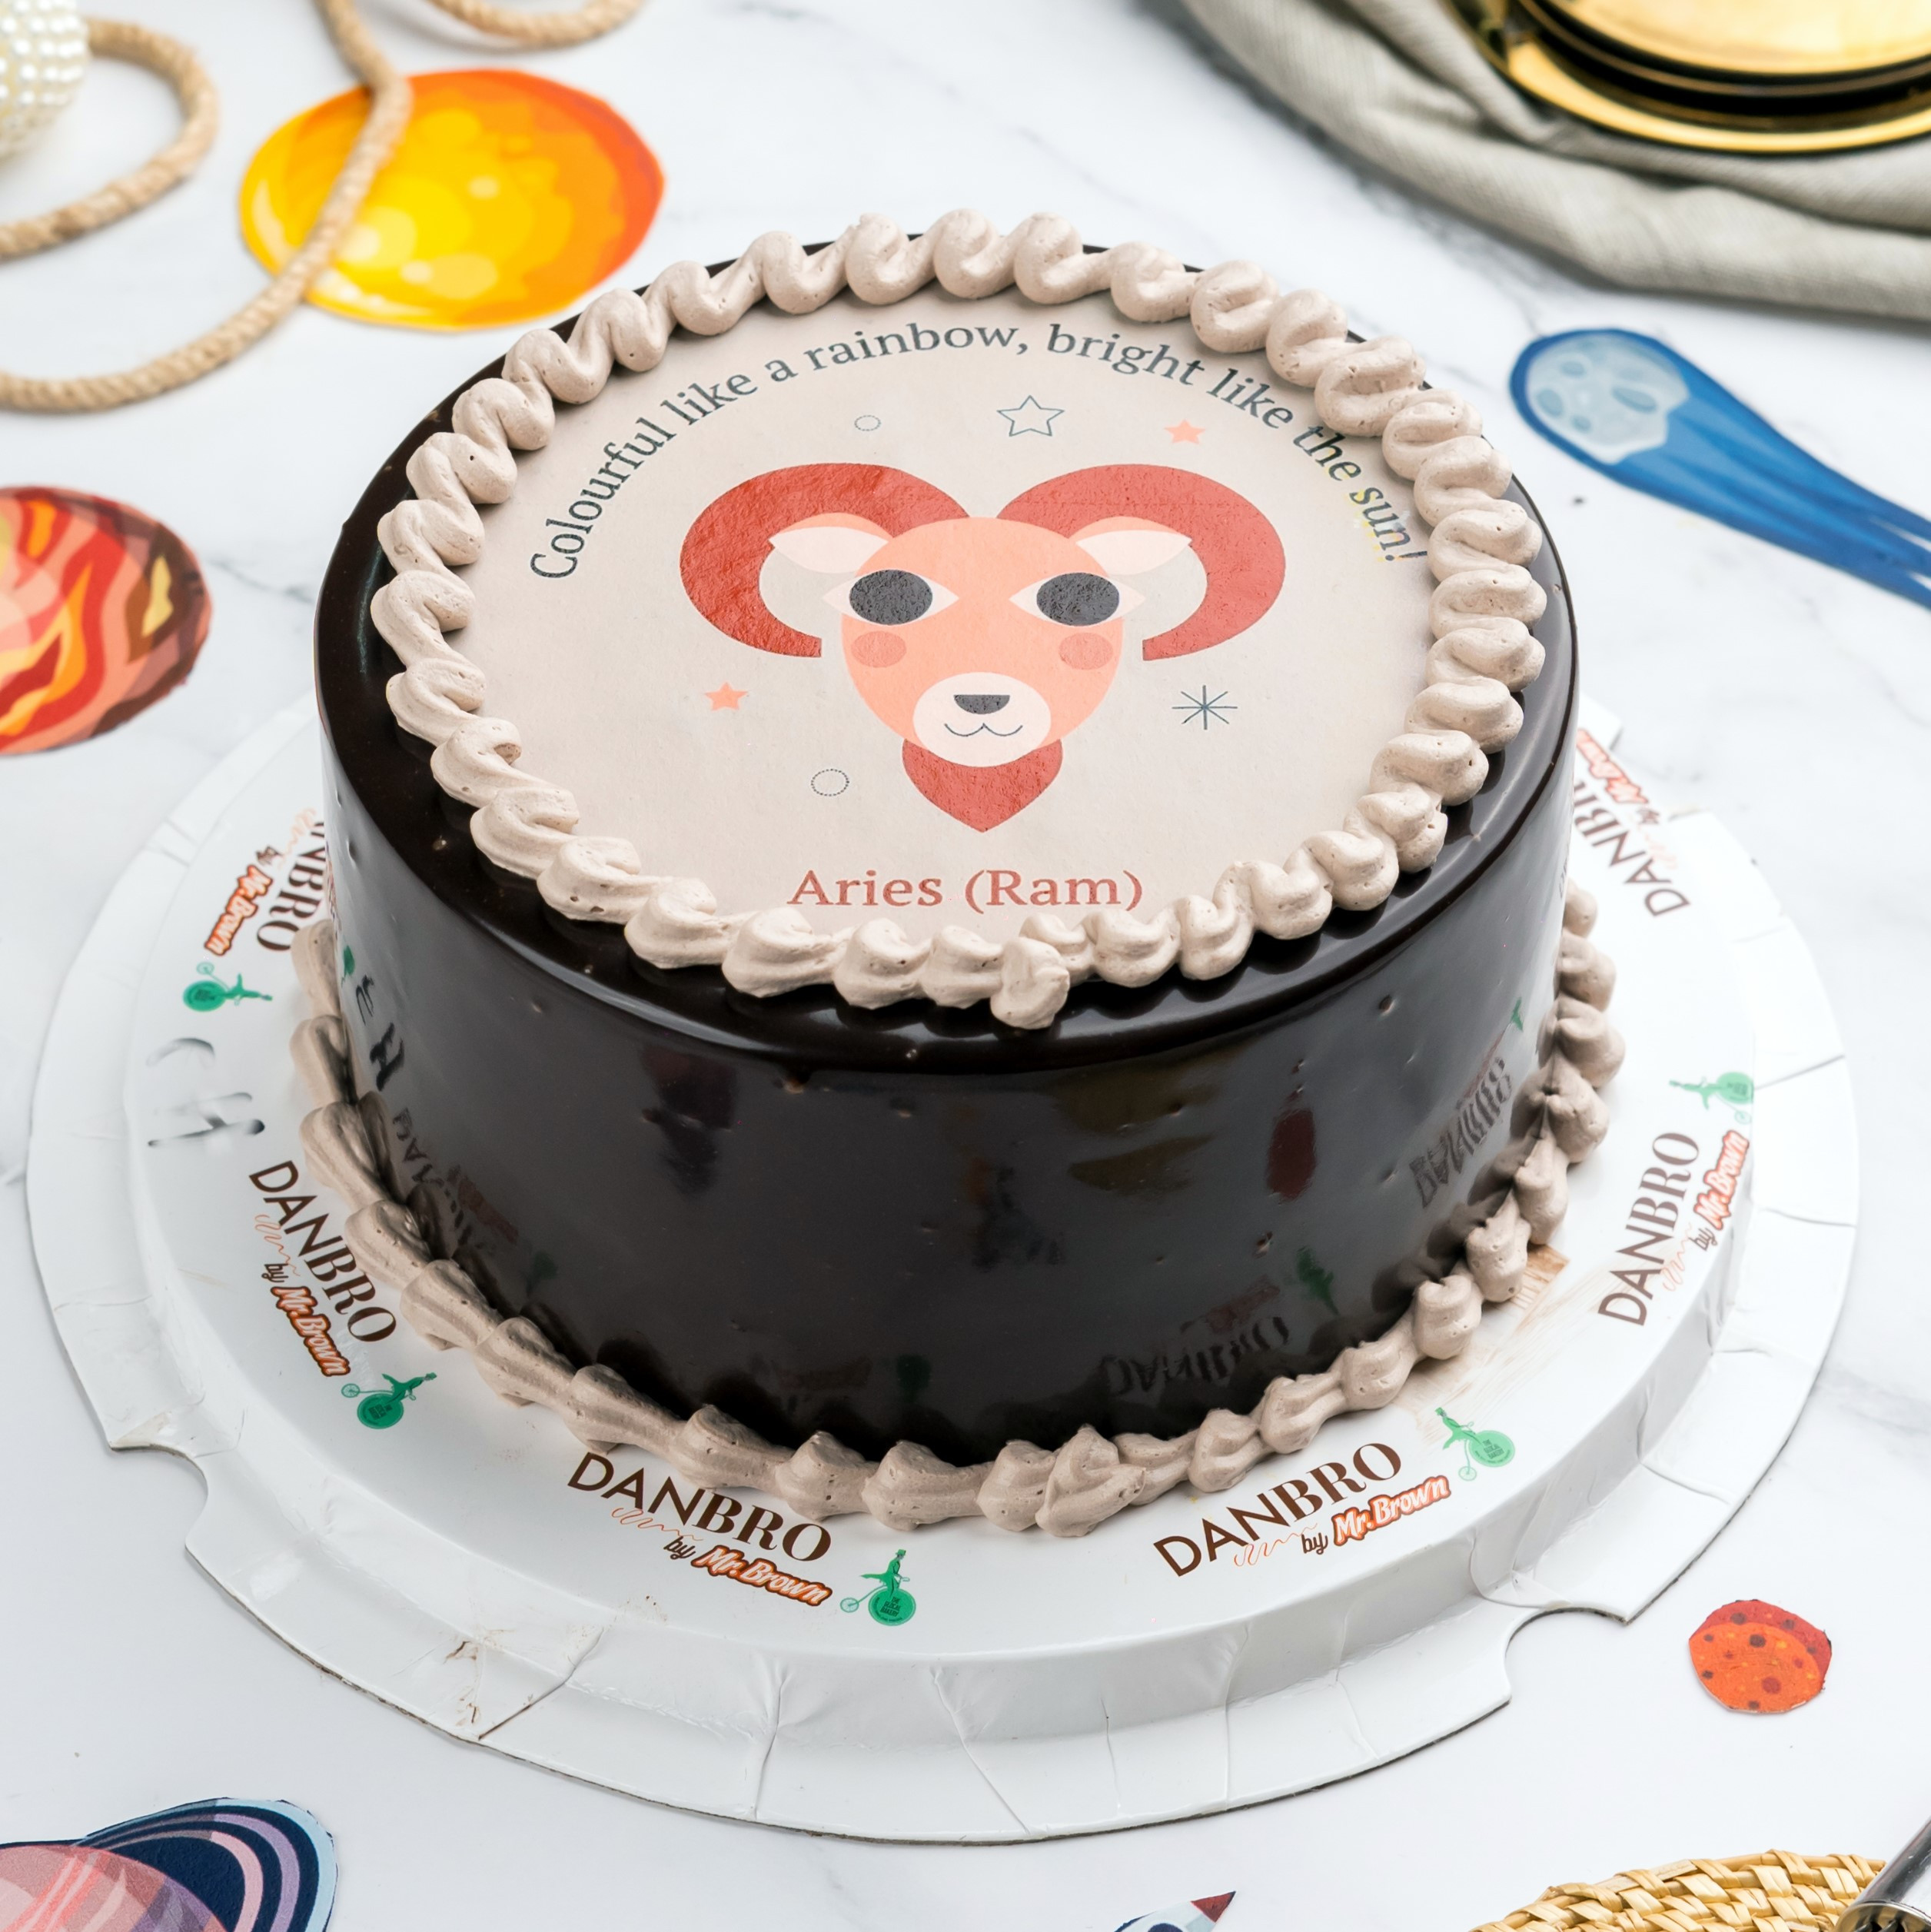 Learn About Your Birthday Cake Based On Your Zodiac Sign